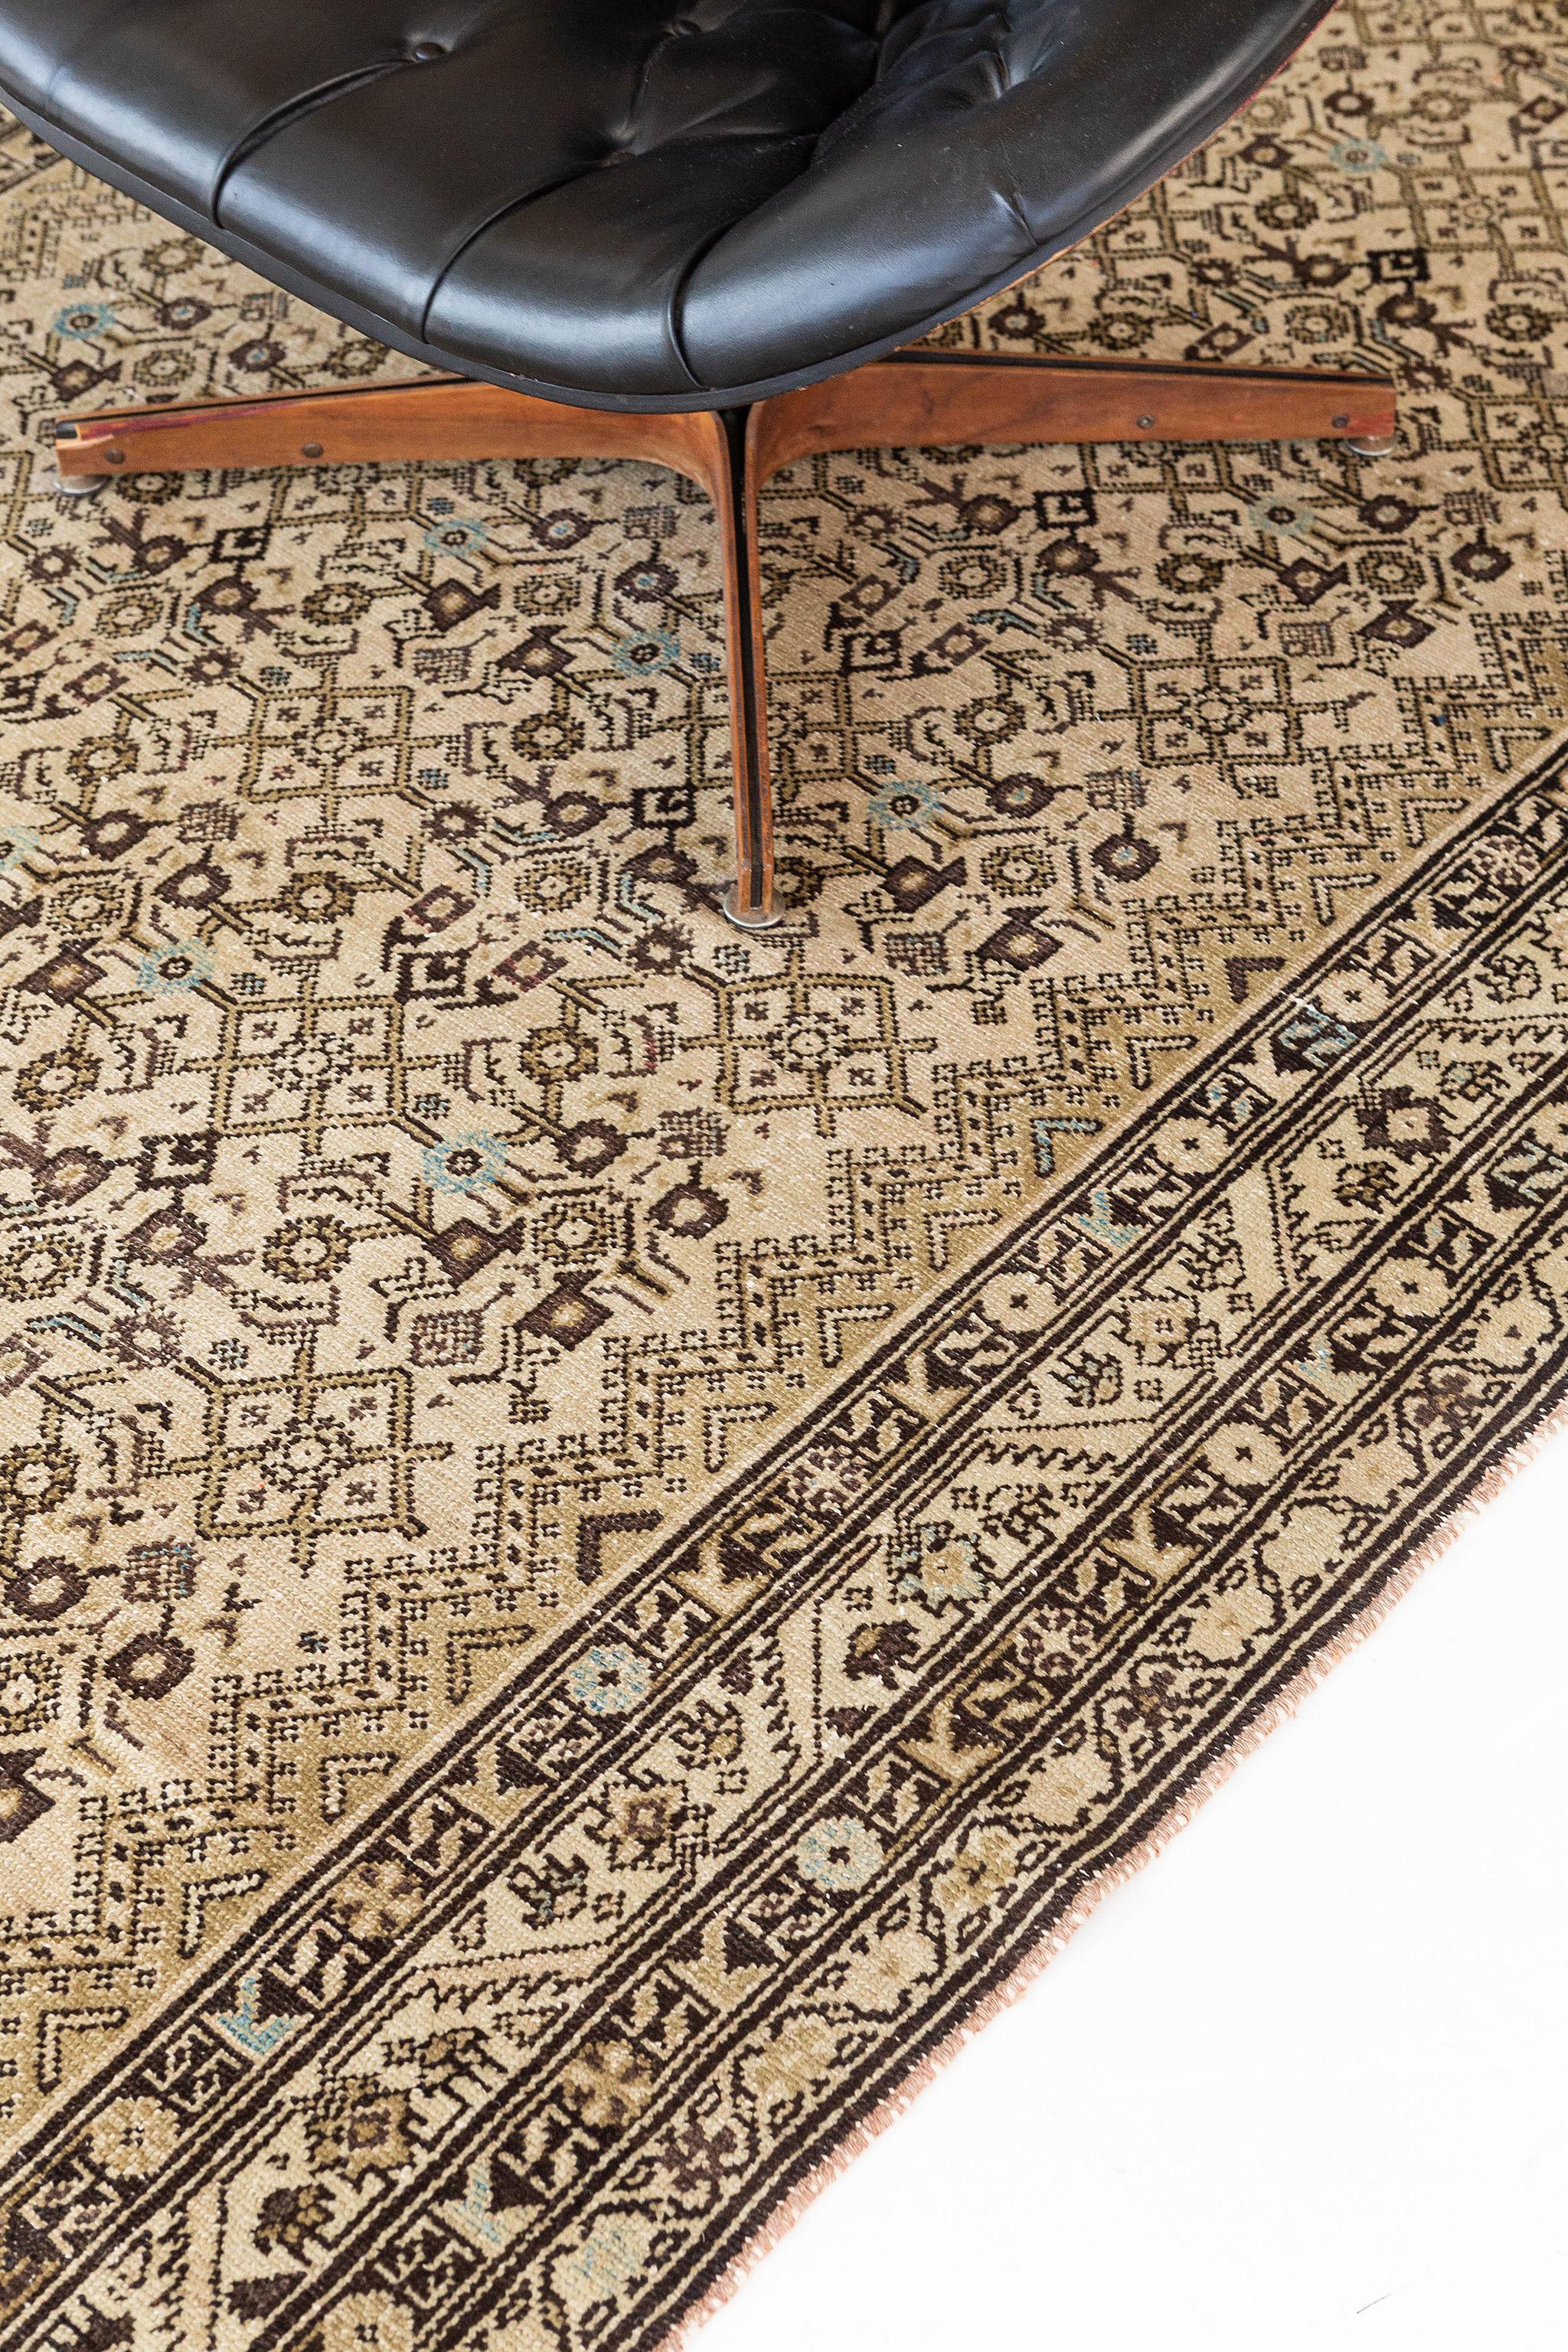 With its all-over botanical design and mesmerizing well-balanced symmetry, this antique Persian Malayer runner would bring a sense of understated elegance to nearly any space. The abrashed tan field features a breathtaking intricate details of